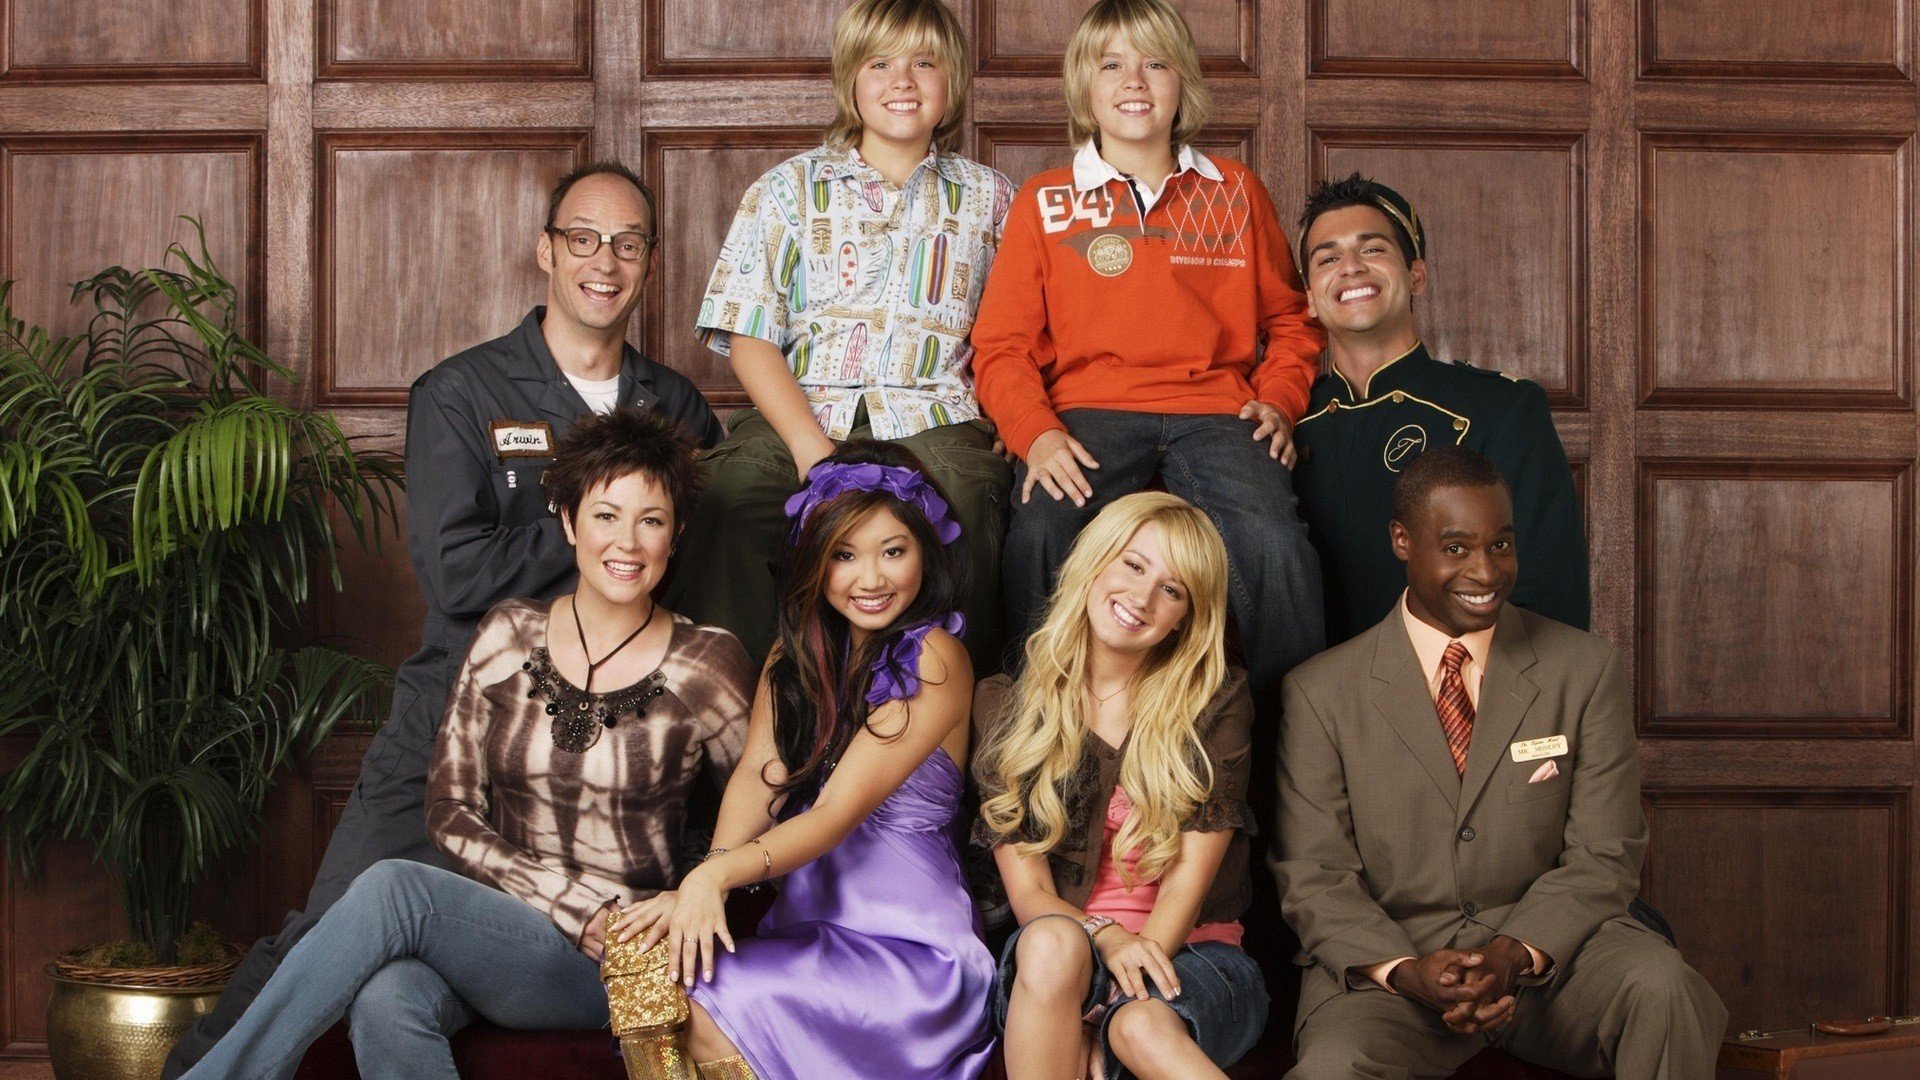 Remember The Suite Life Of Zack And Cody? This Is What The Cast Look